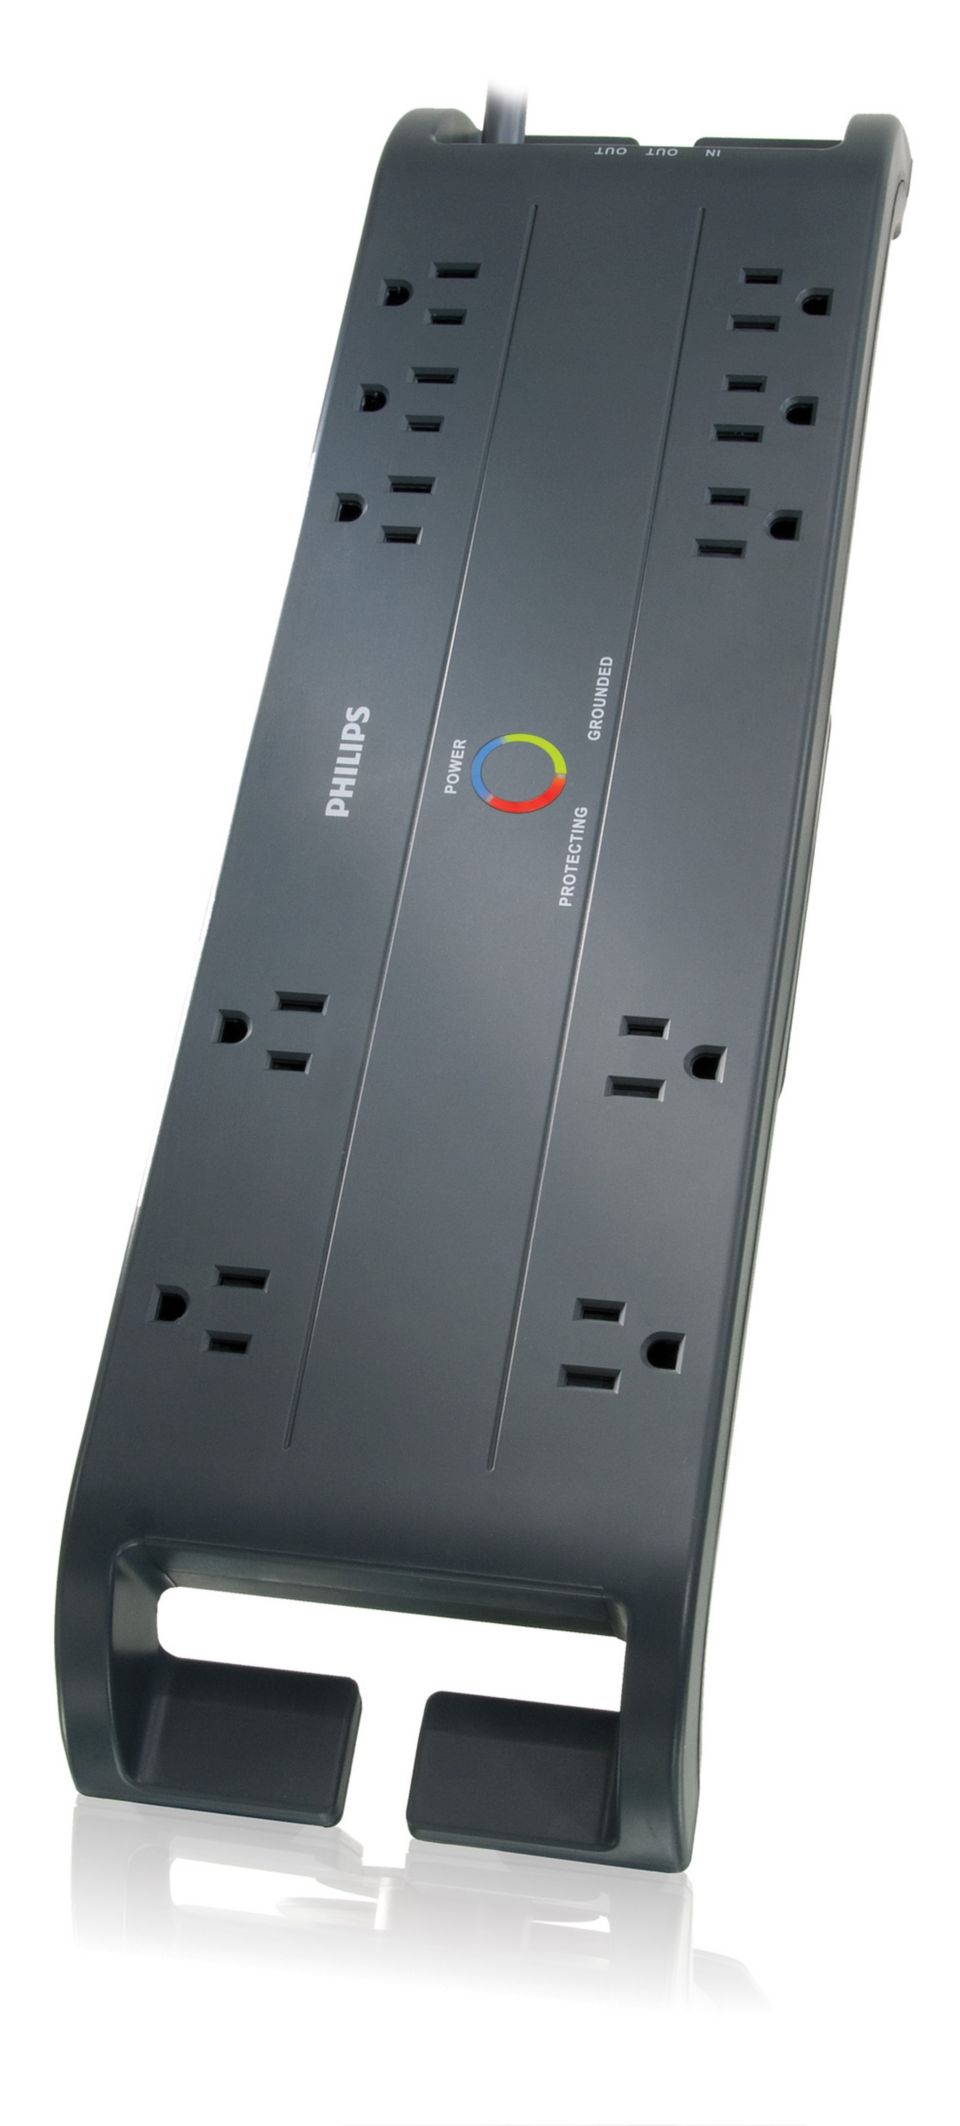 Home Office Surge Protector SPP4101B/17 | Philips